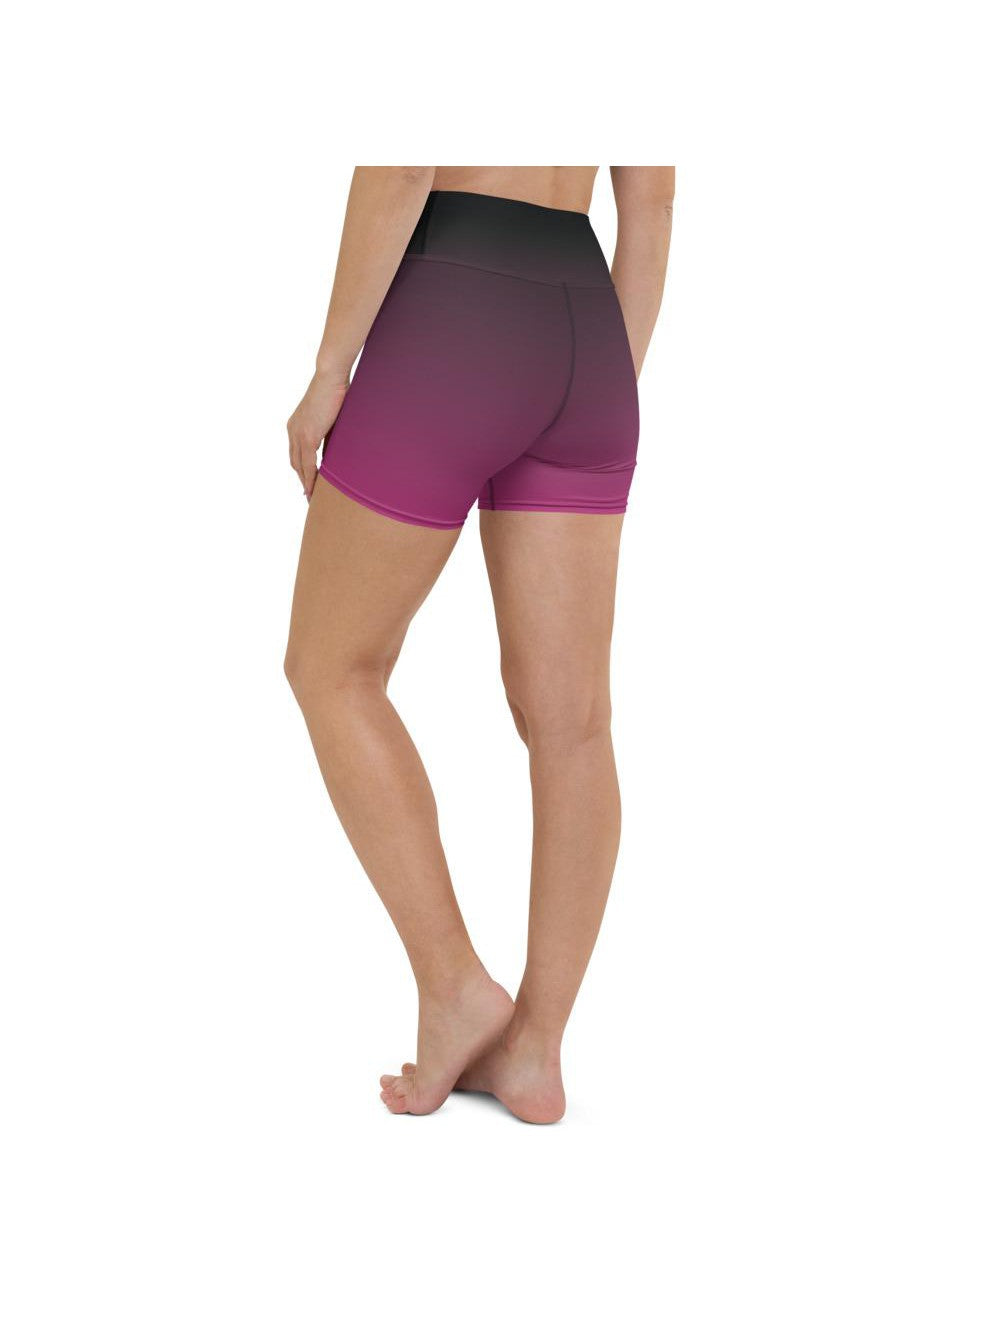 Womens Yoga Shorts Ombre Black to Pink | Gearbunch.com